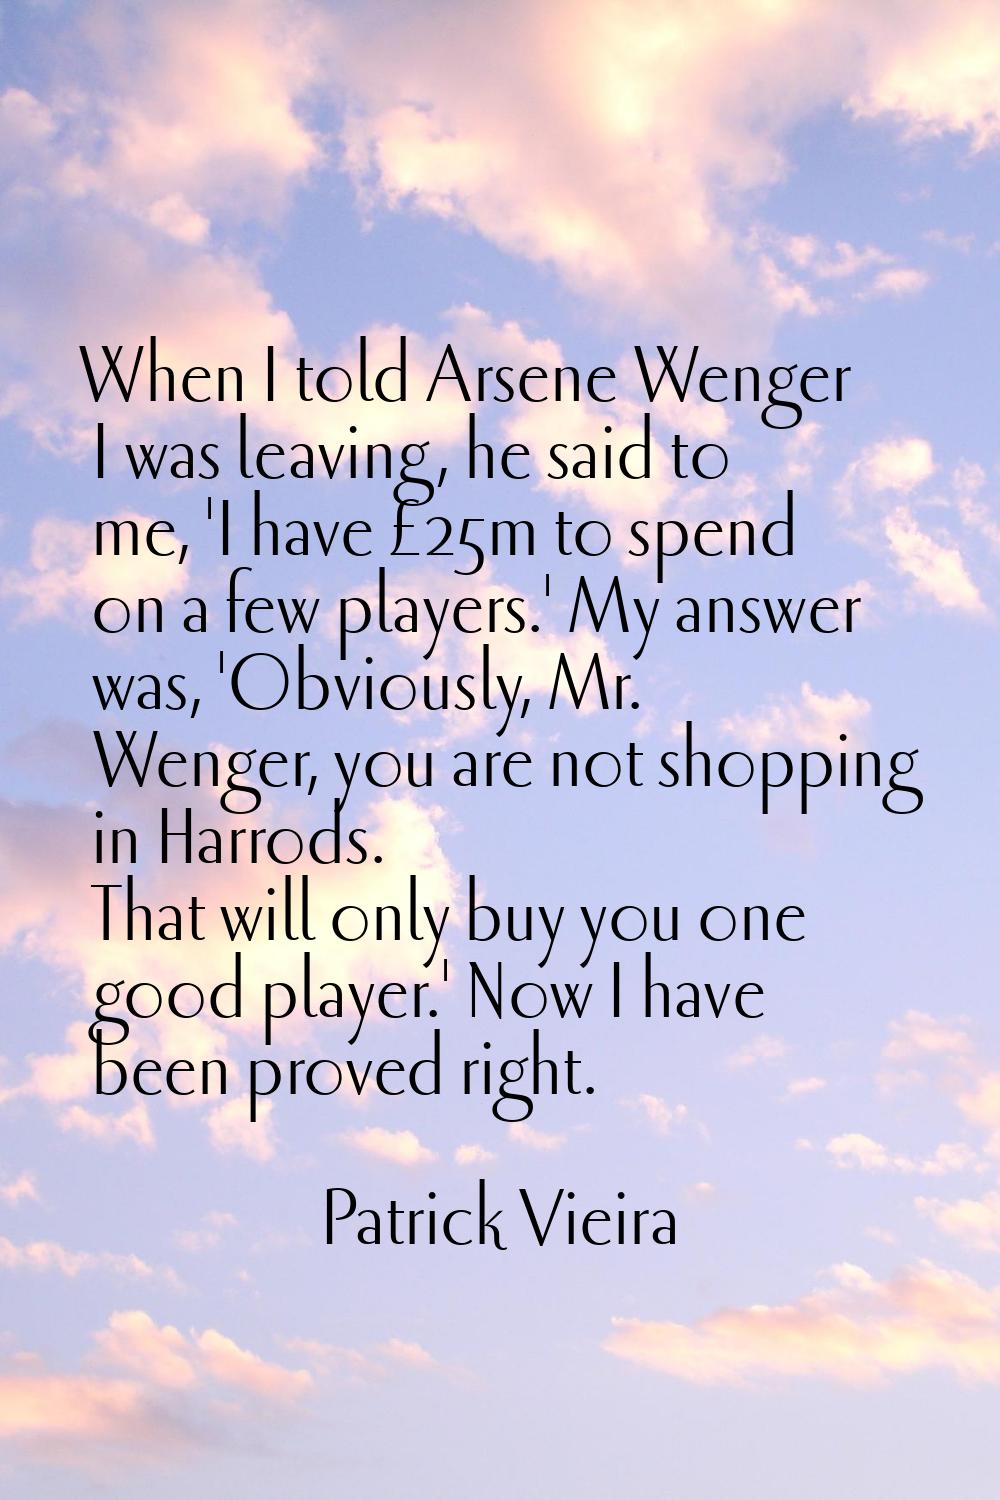 When I told Arsene Wenger I was leaving, he said to me, 'I have £25m to spend on a few players.' My